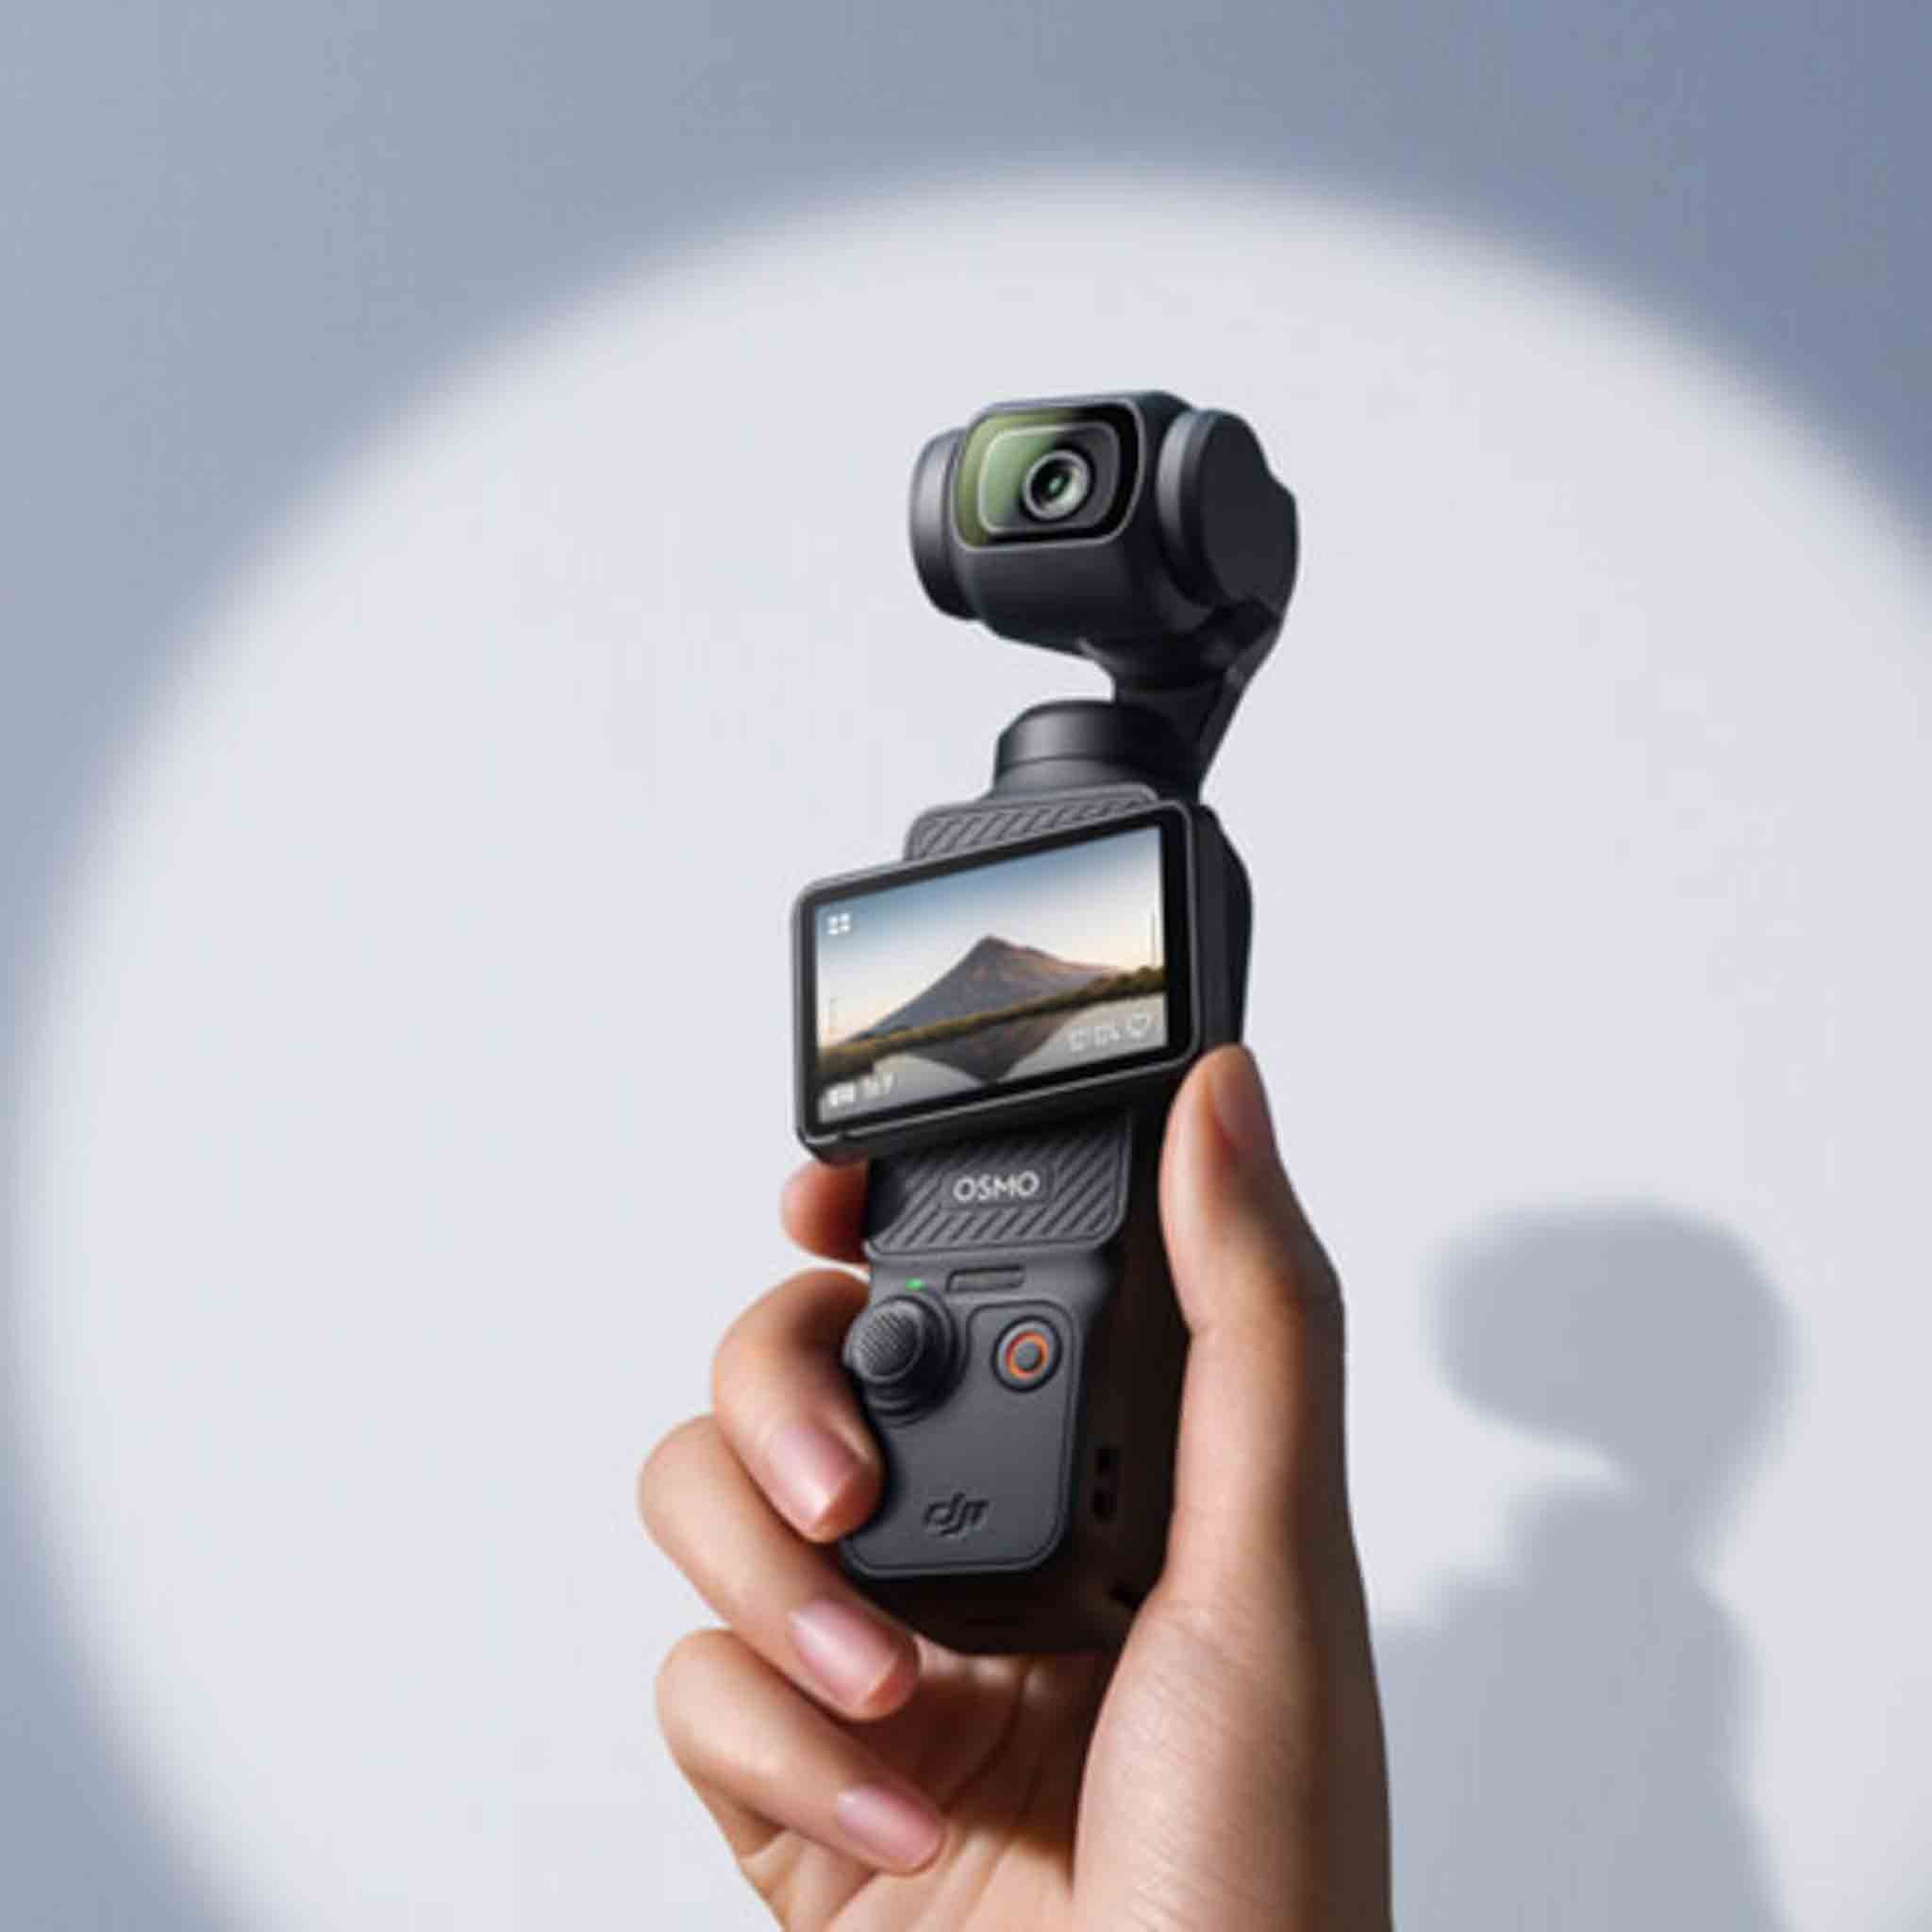 Osmo Pocket 3 - Features and Breakdown - Is it Worth Buying - The Wildest Road Blog Gear Reviews.jpg